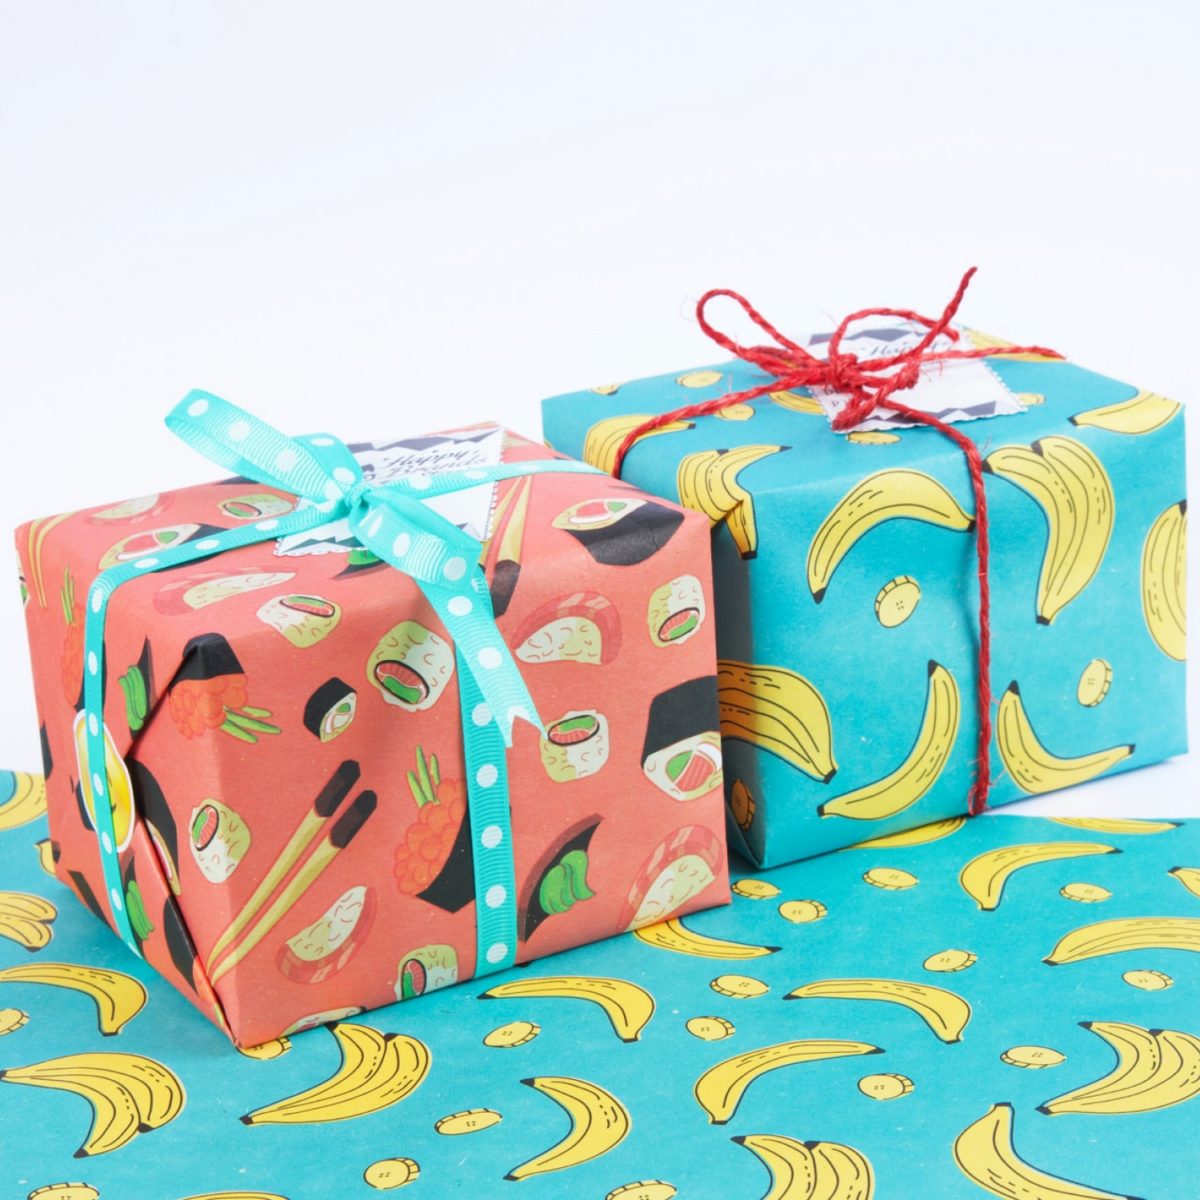 Let Give InKind’s Gift Box Department handle your gifting needs!